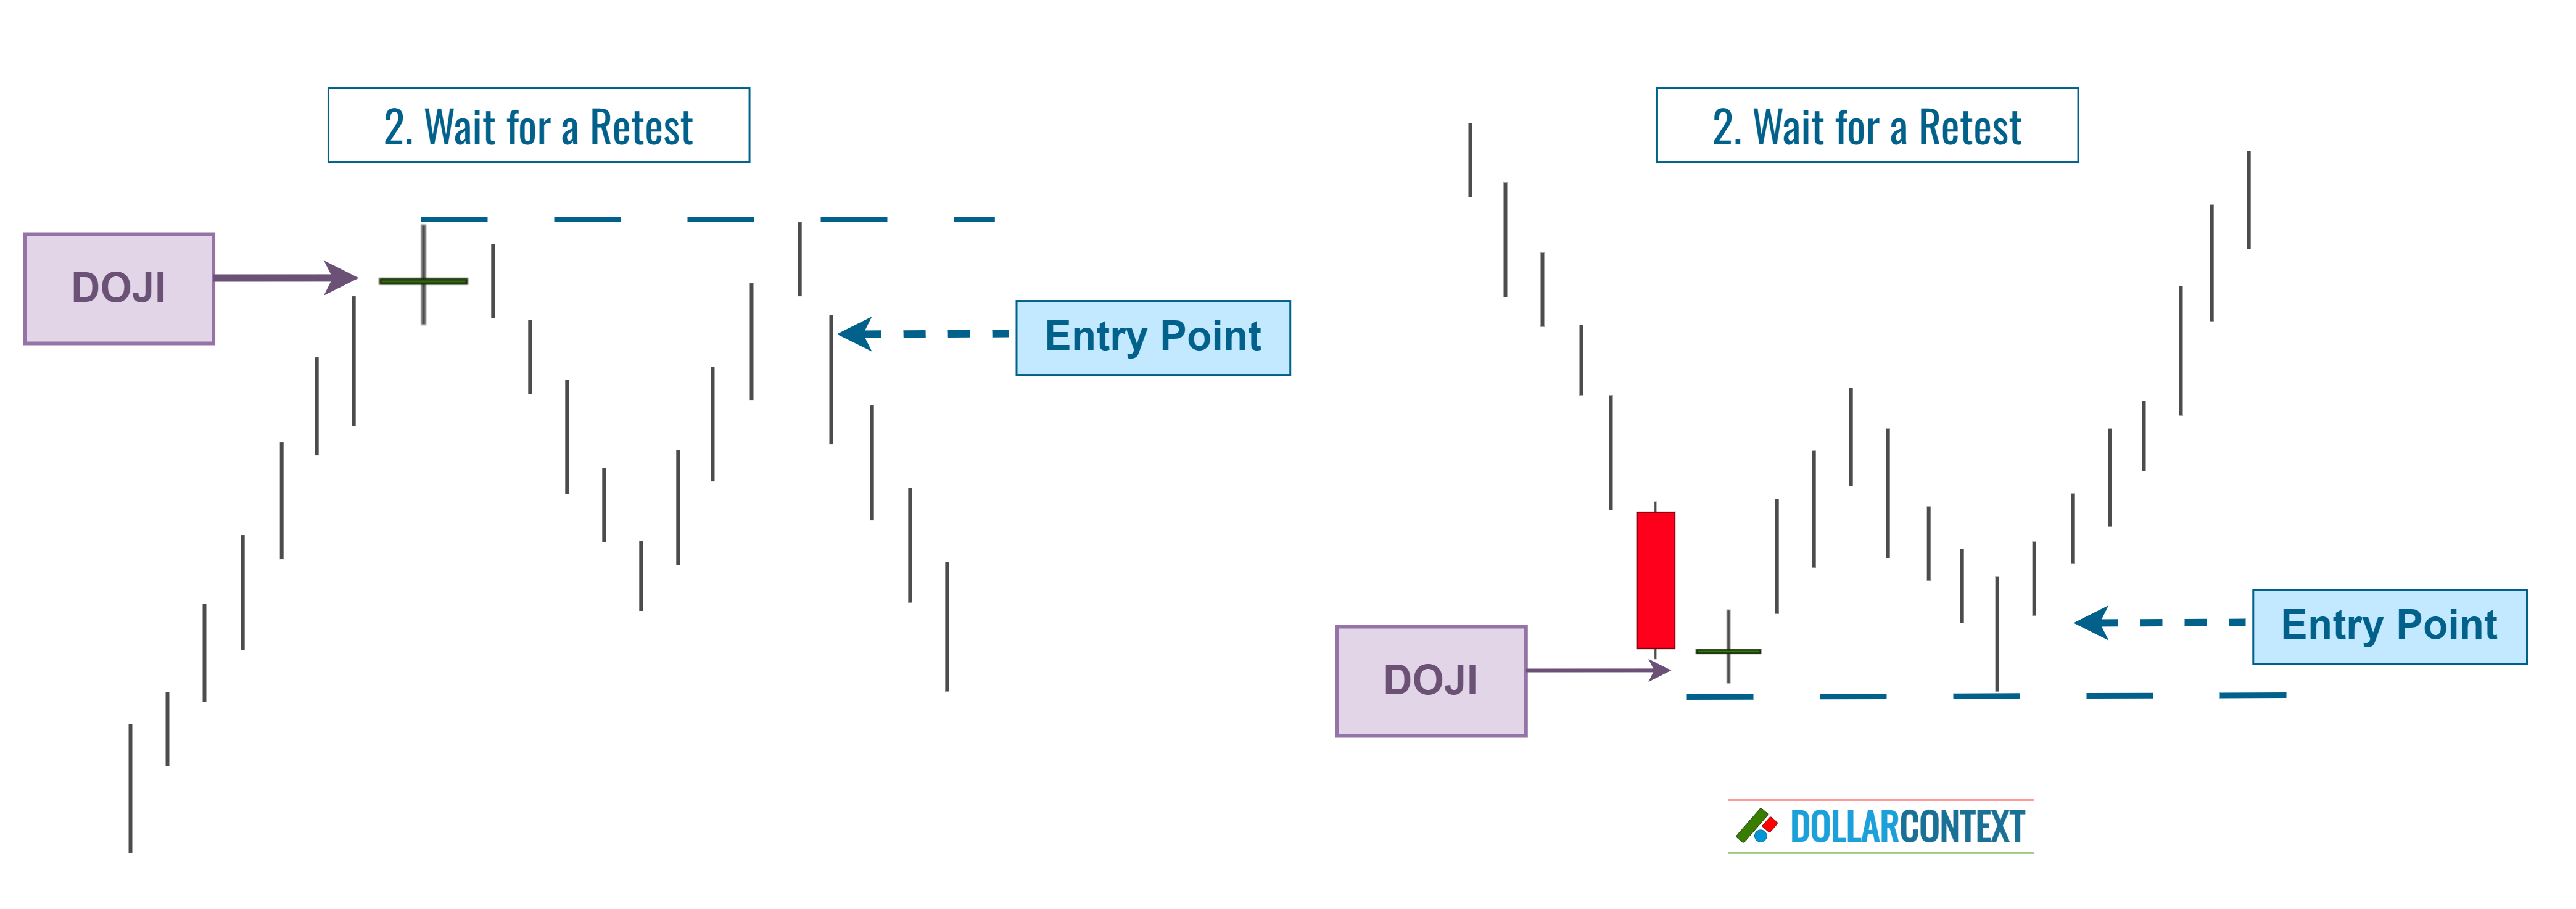 Entry After a Retest